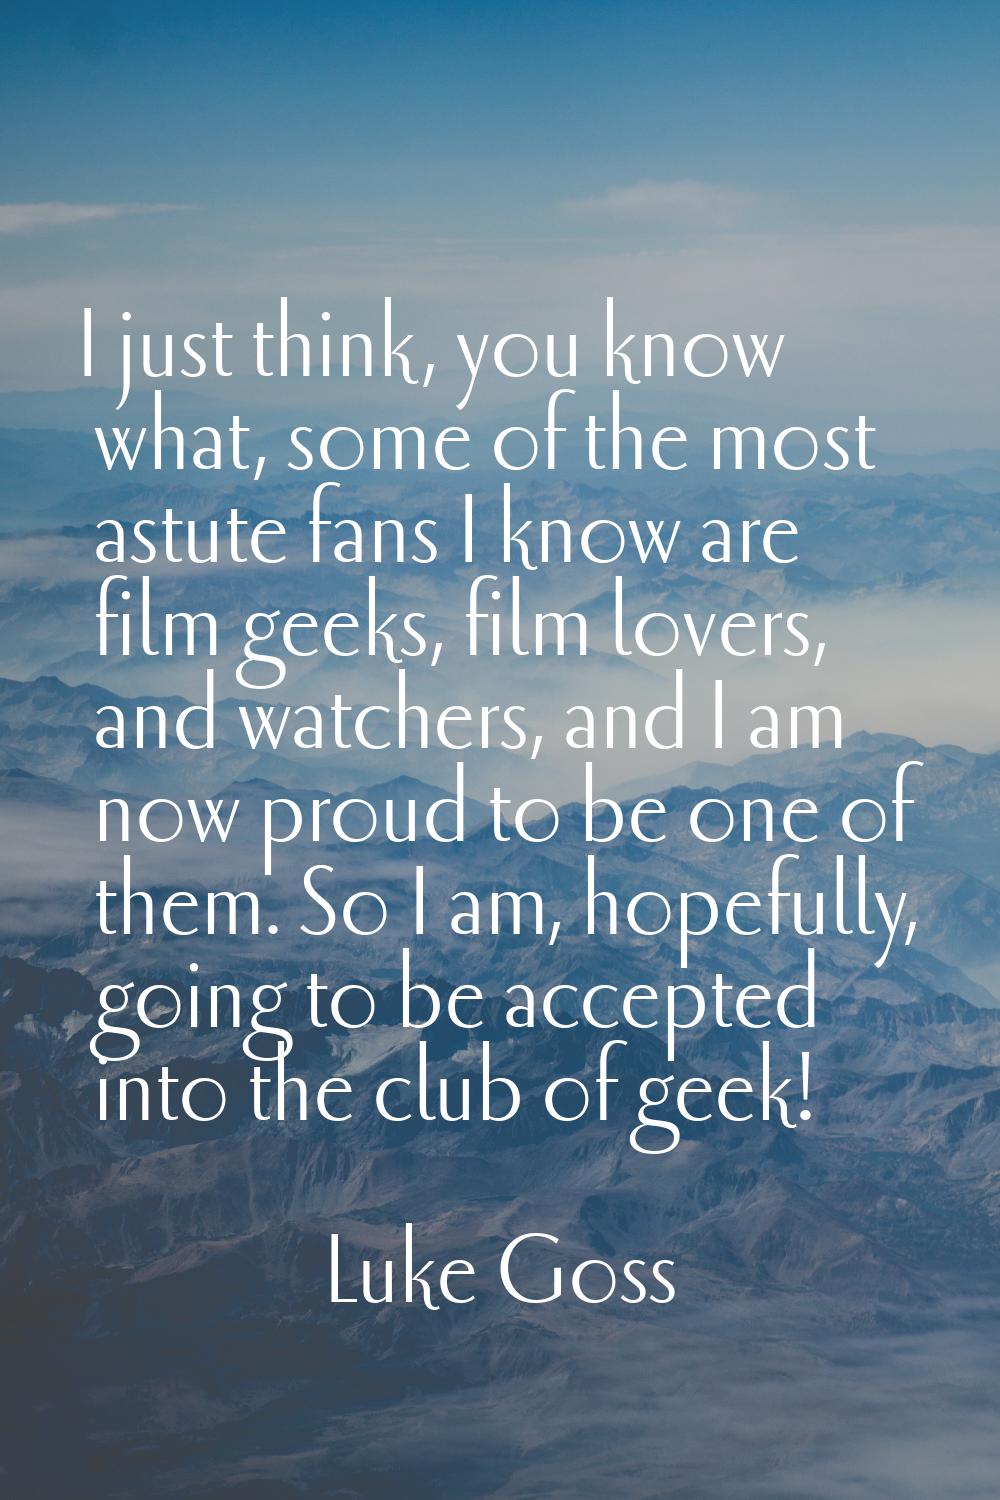 I just think, you know what, some of the most astute fans I know are film geeks, film lovers, and w